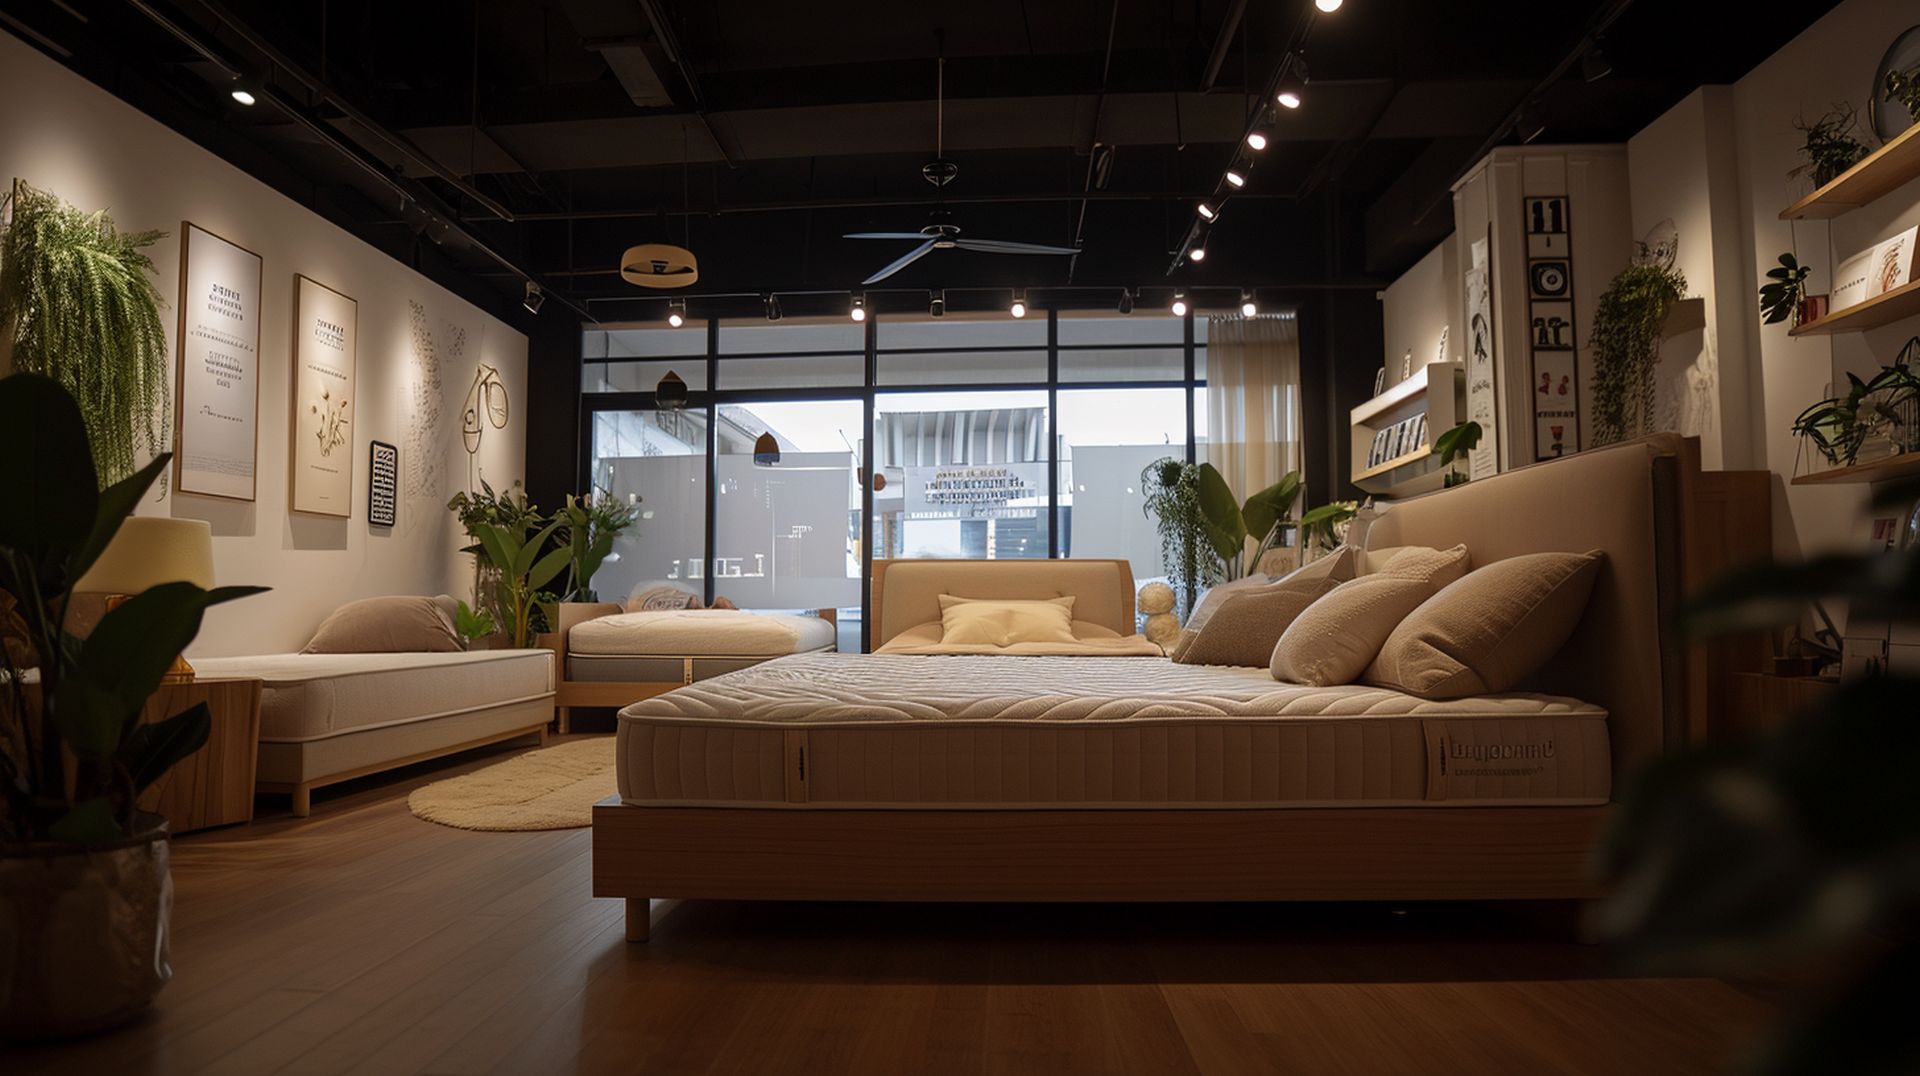 If you're looking for a new bed, mattress stores in Richland offer the best customer and delivery service, financing, and warranties in Washington